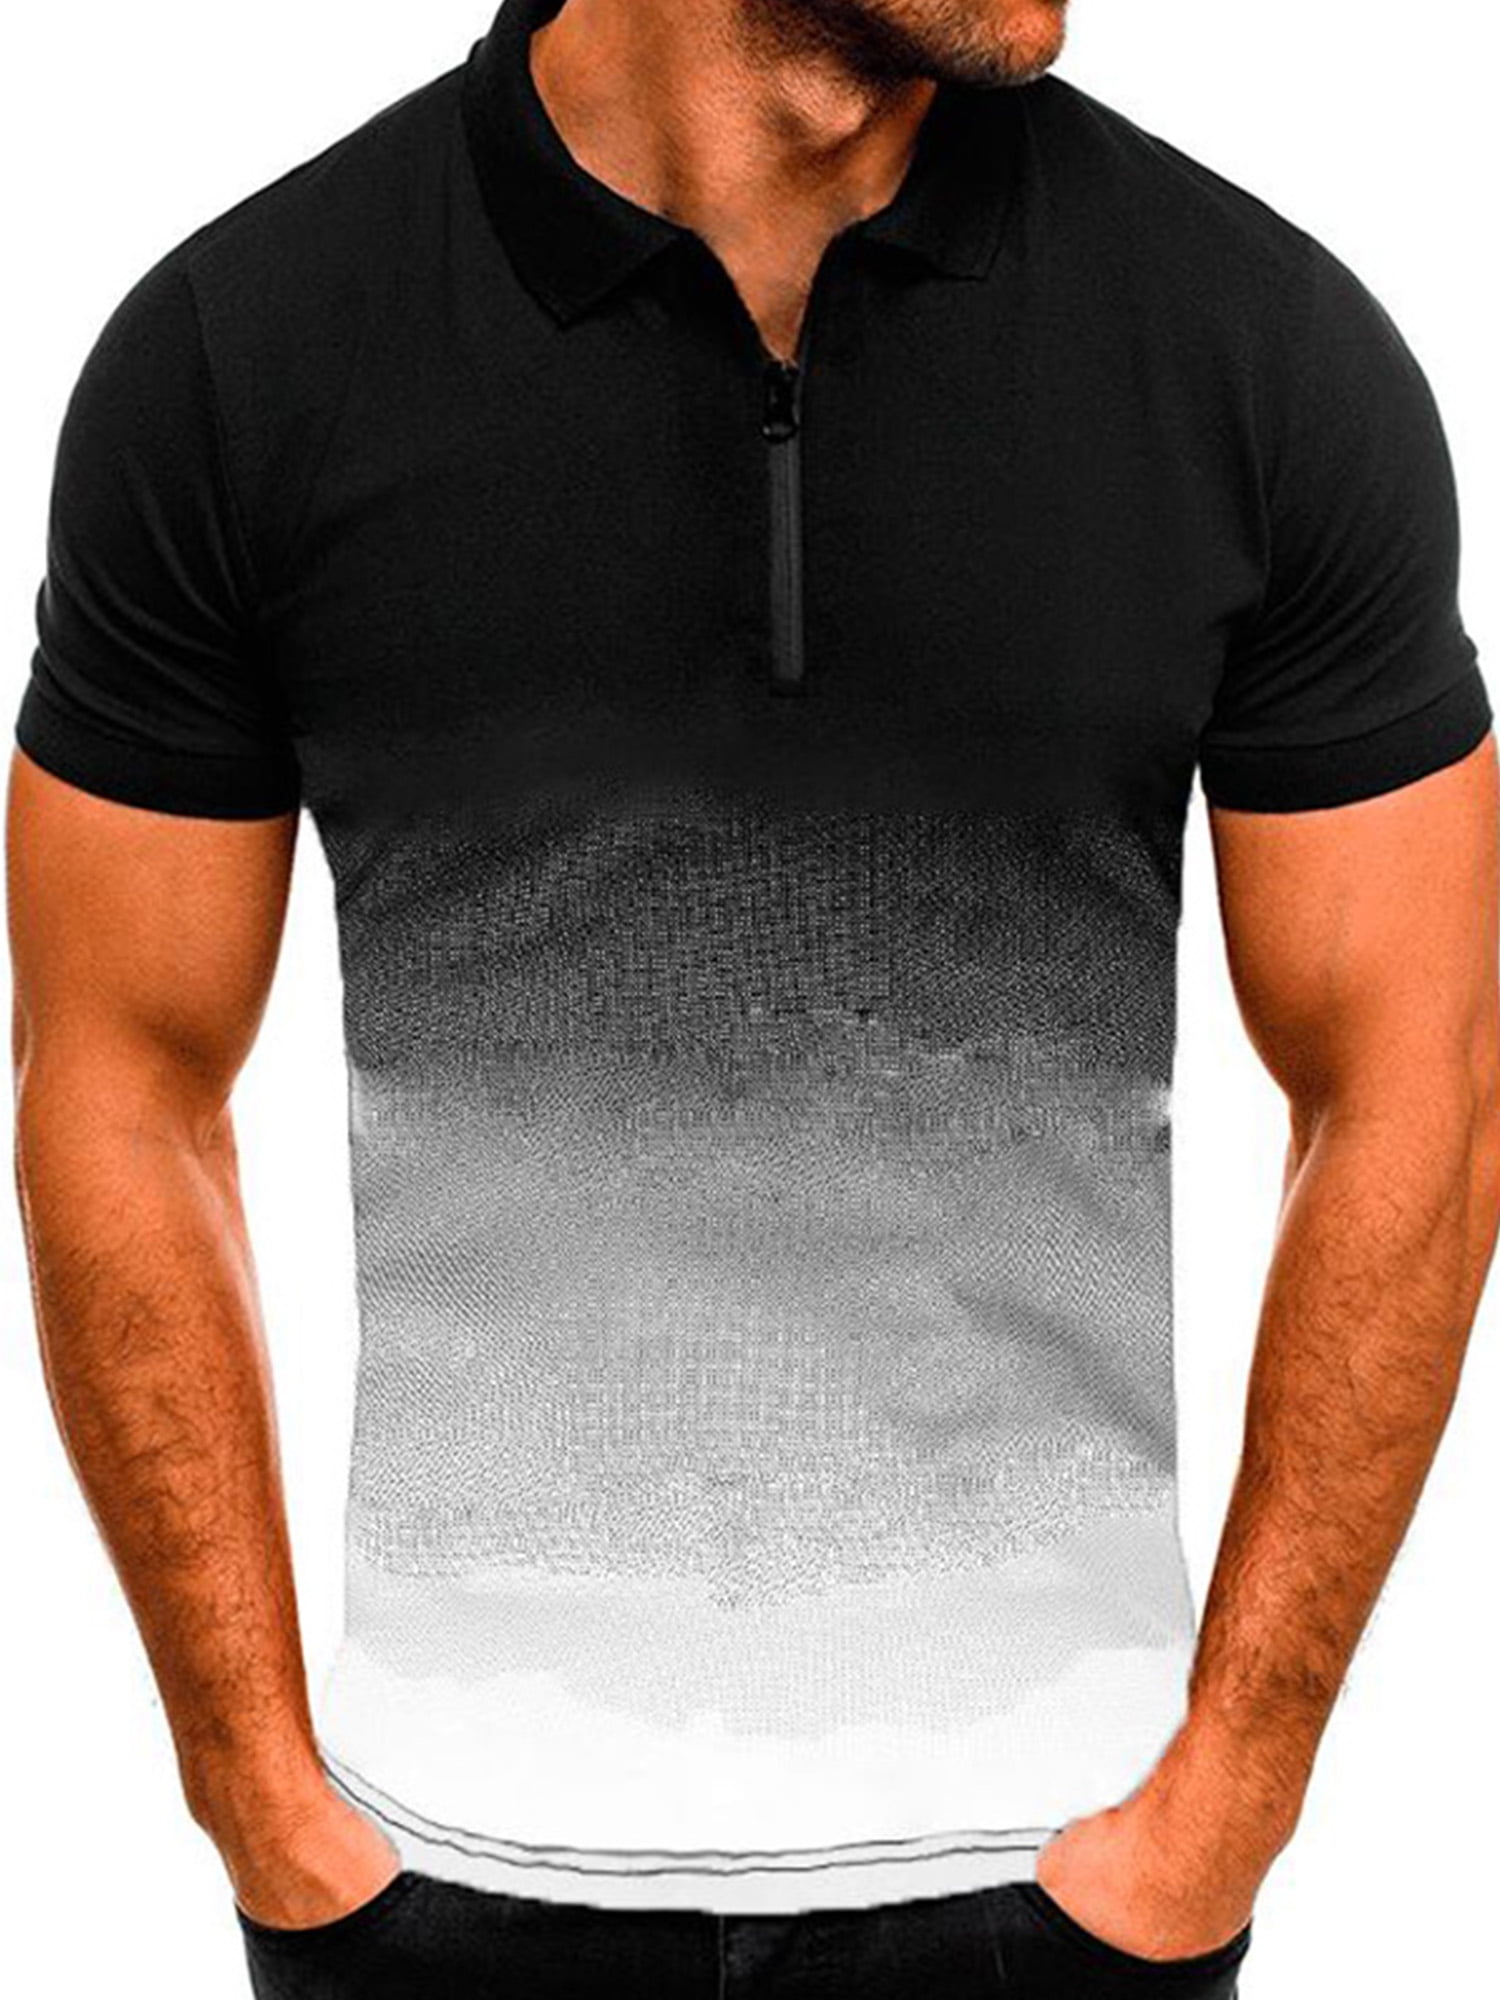 Polo Shirts Tops for Men Short Sleeve Stand-Collar Pullover Casual Tees Deers Print Slim-Fit Muscle T-Shirt Gift for Dad